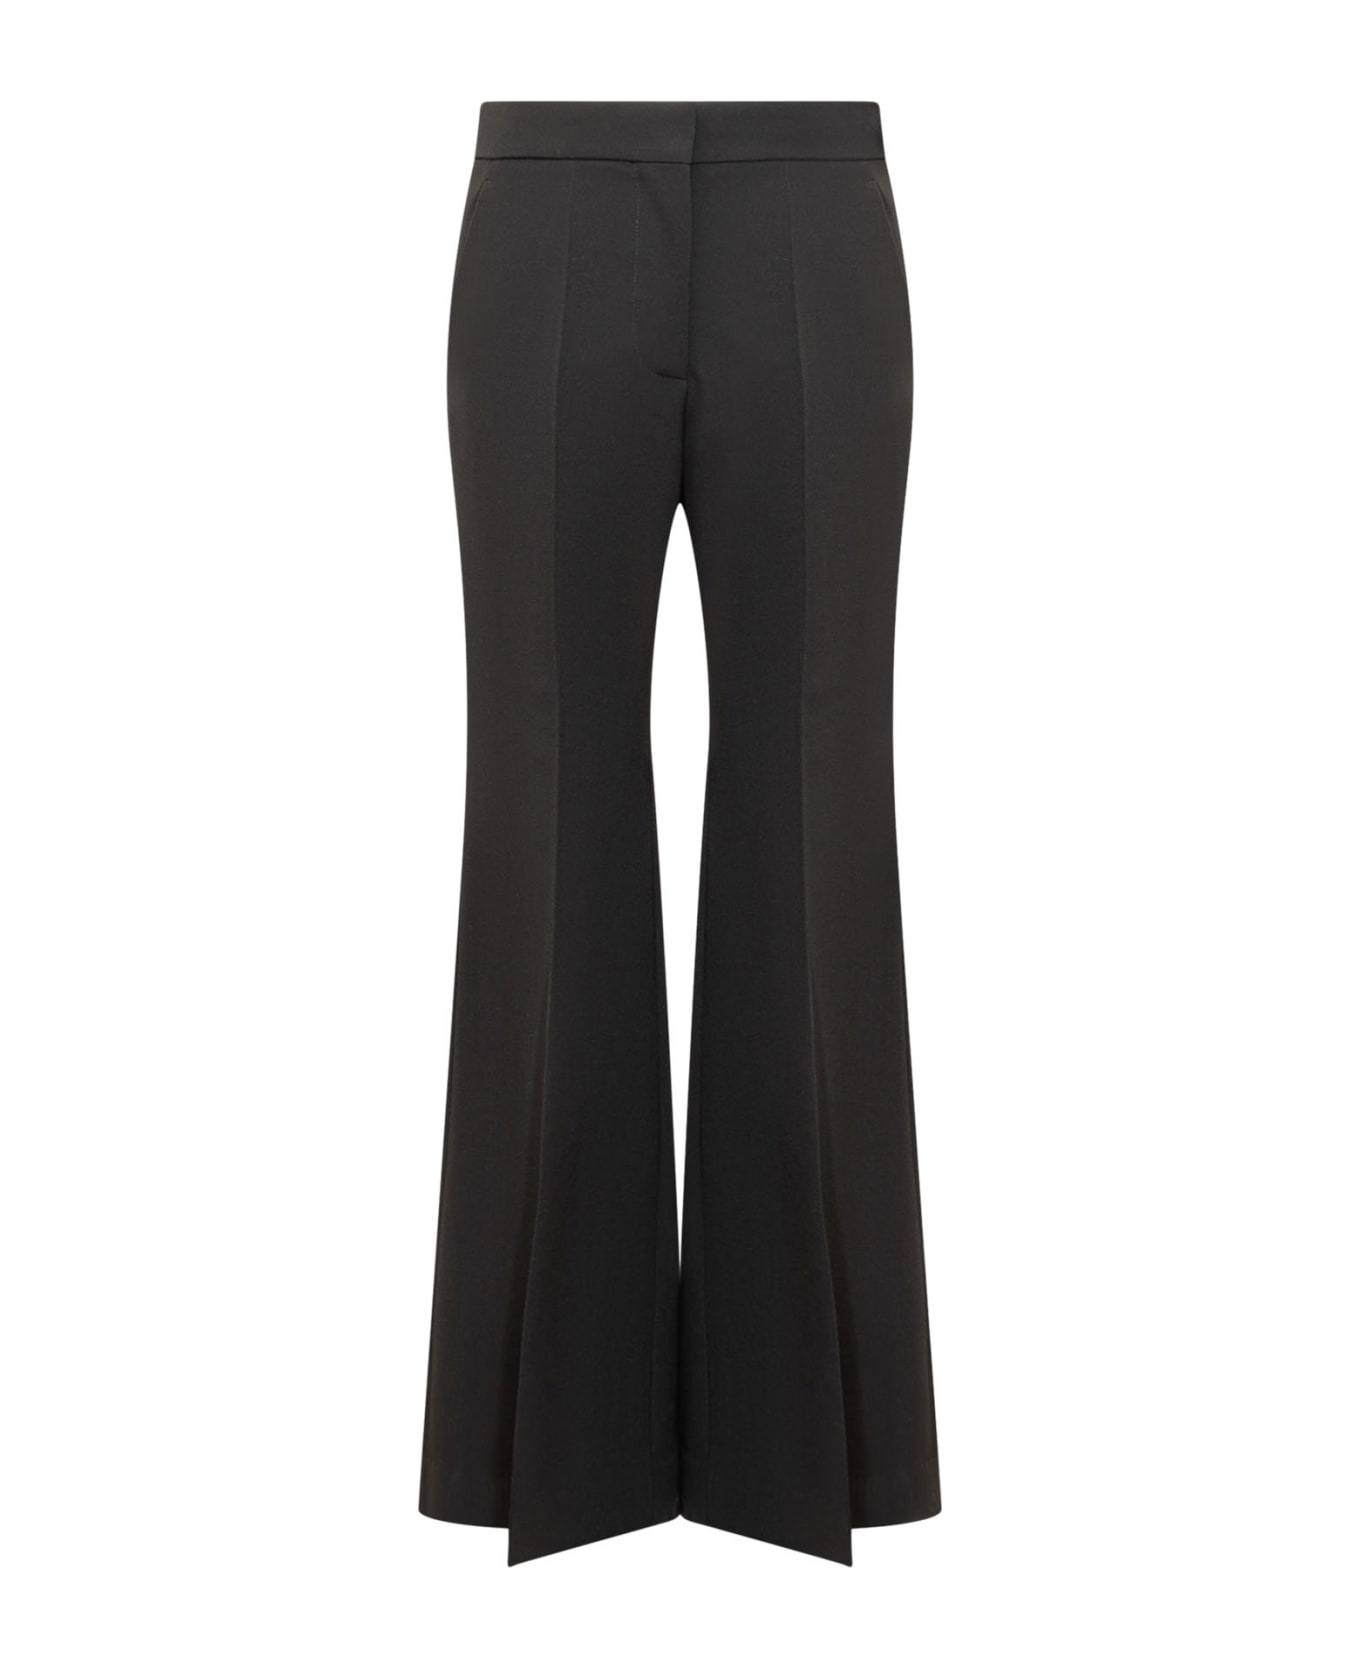 Givenchy Trousers - BLACK